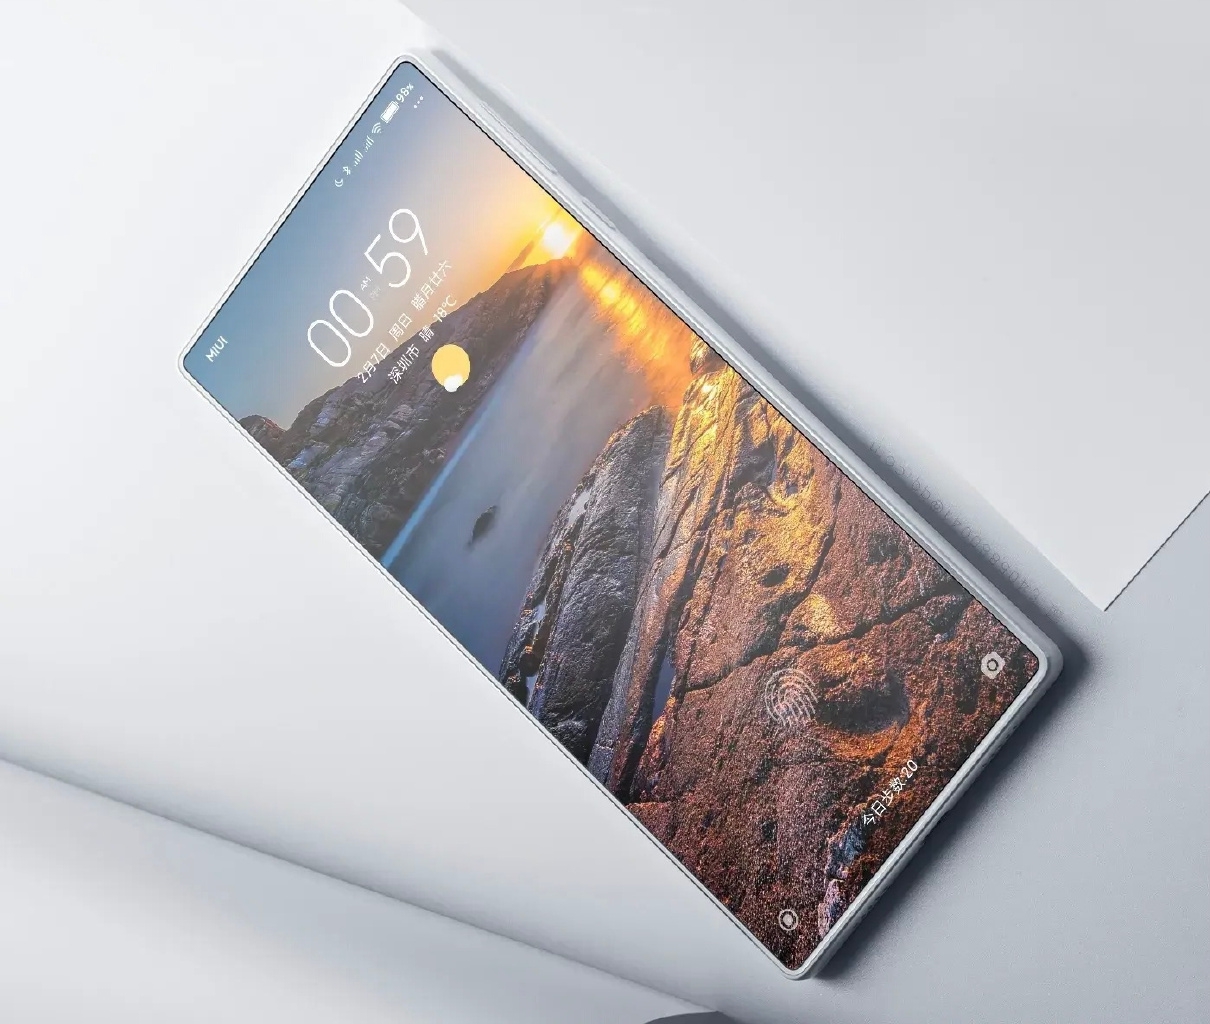 Quality images of Xiaomi Mi Mix 4 with sub-screen camera

